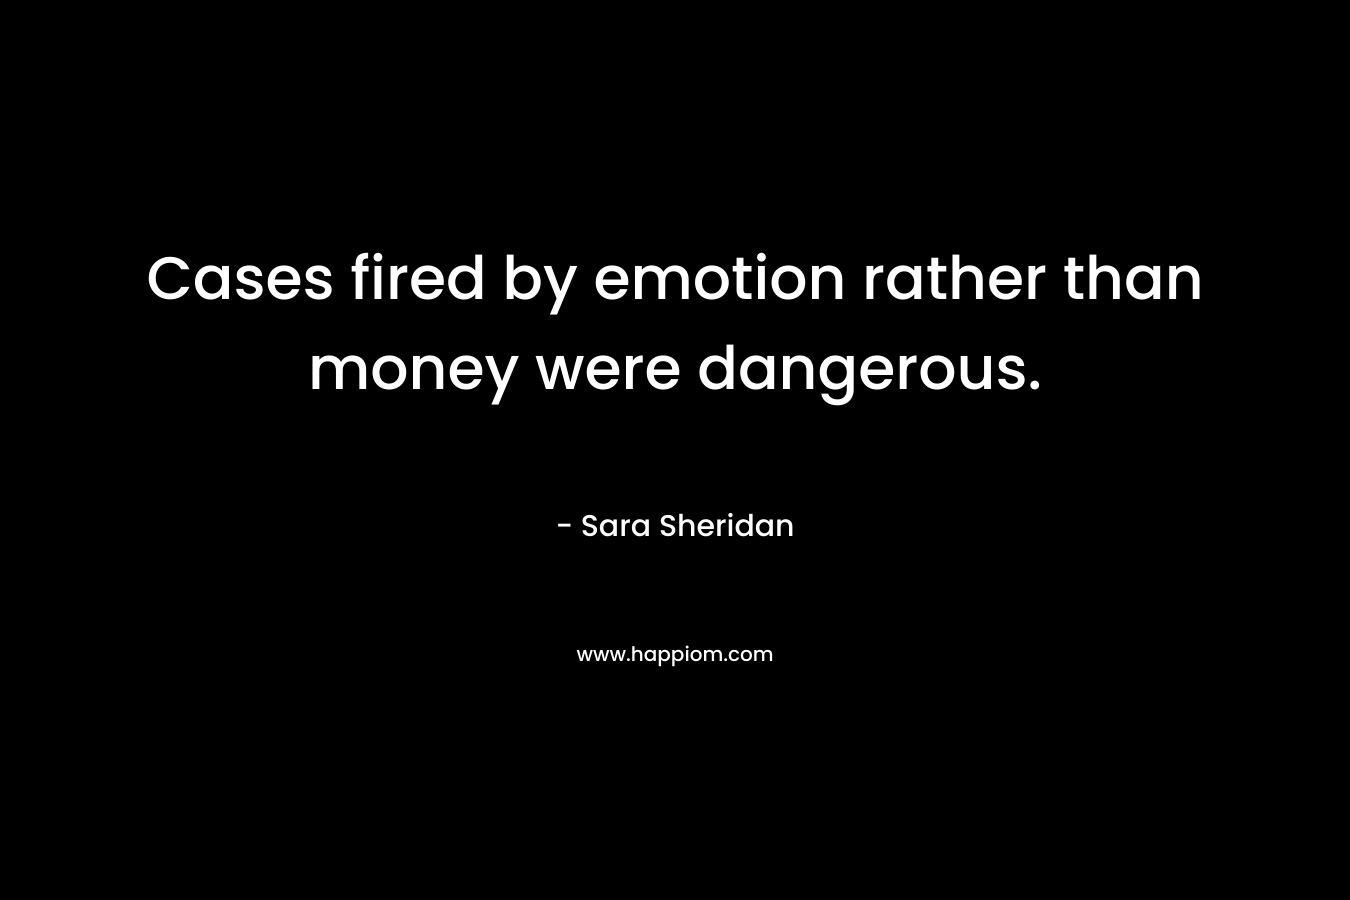 Cases fired by emotion rather than money were dangerous. – Sara Sheridan